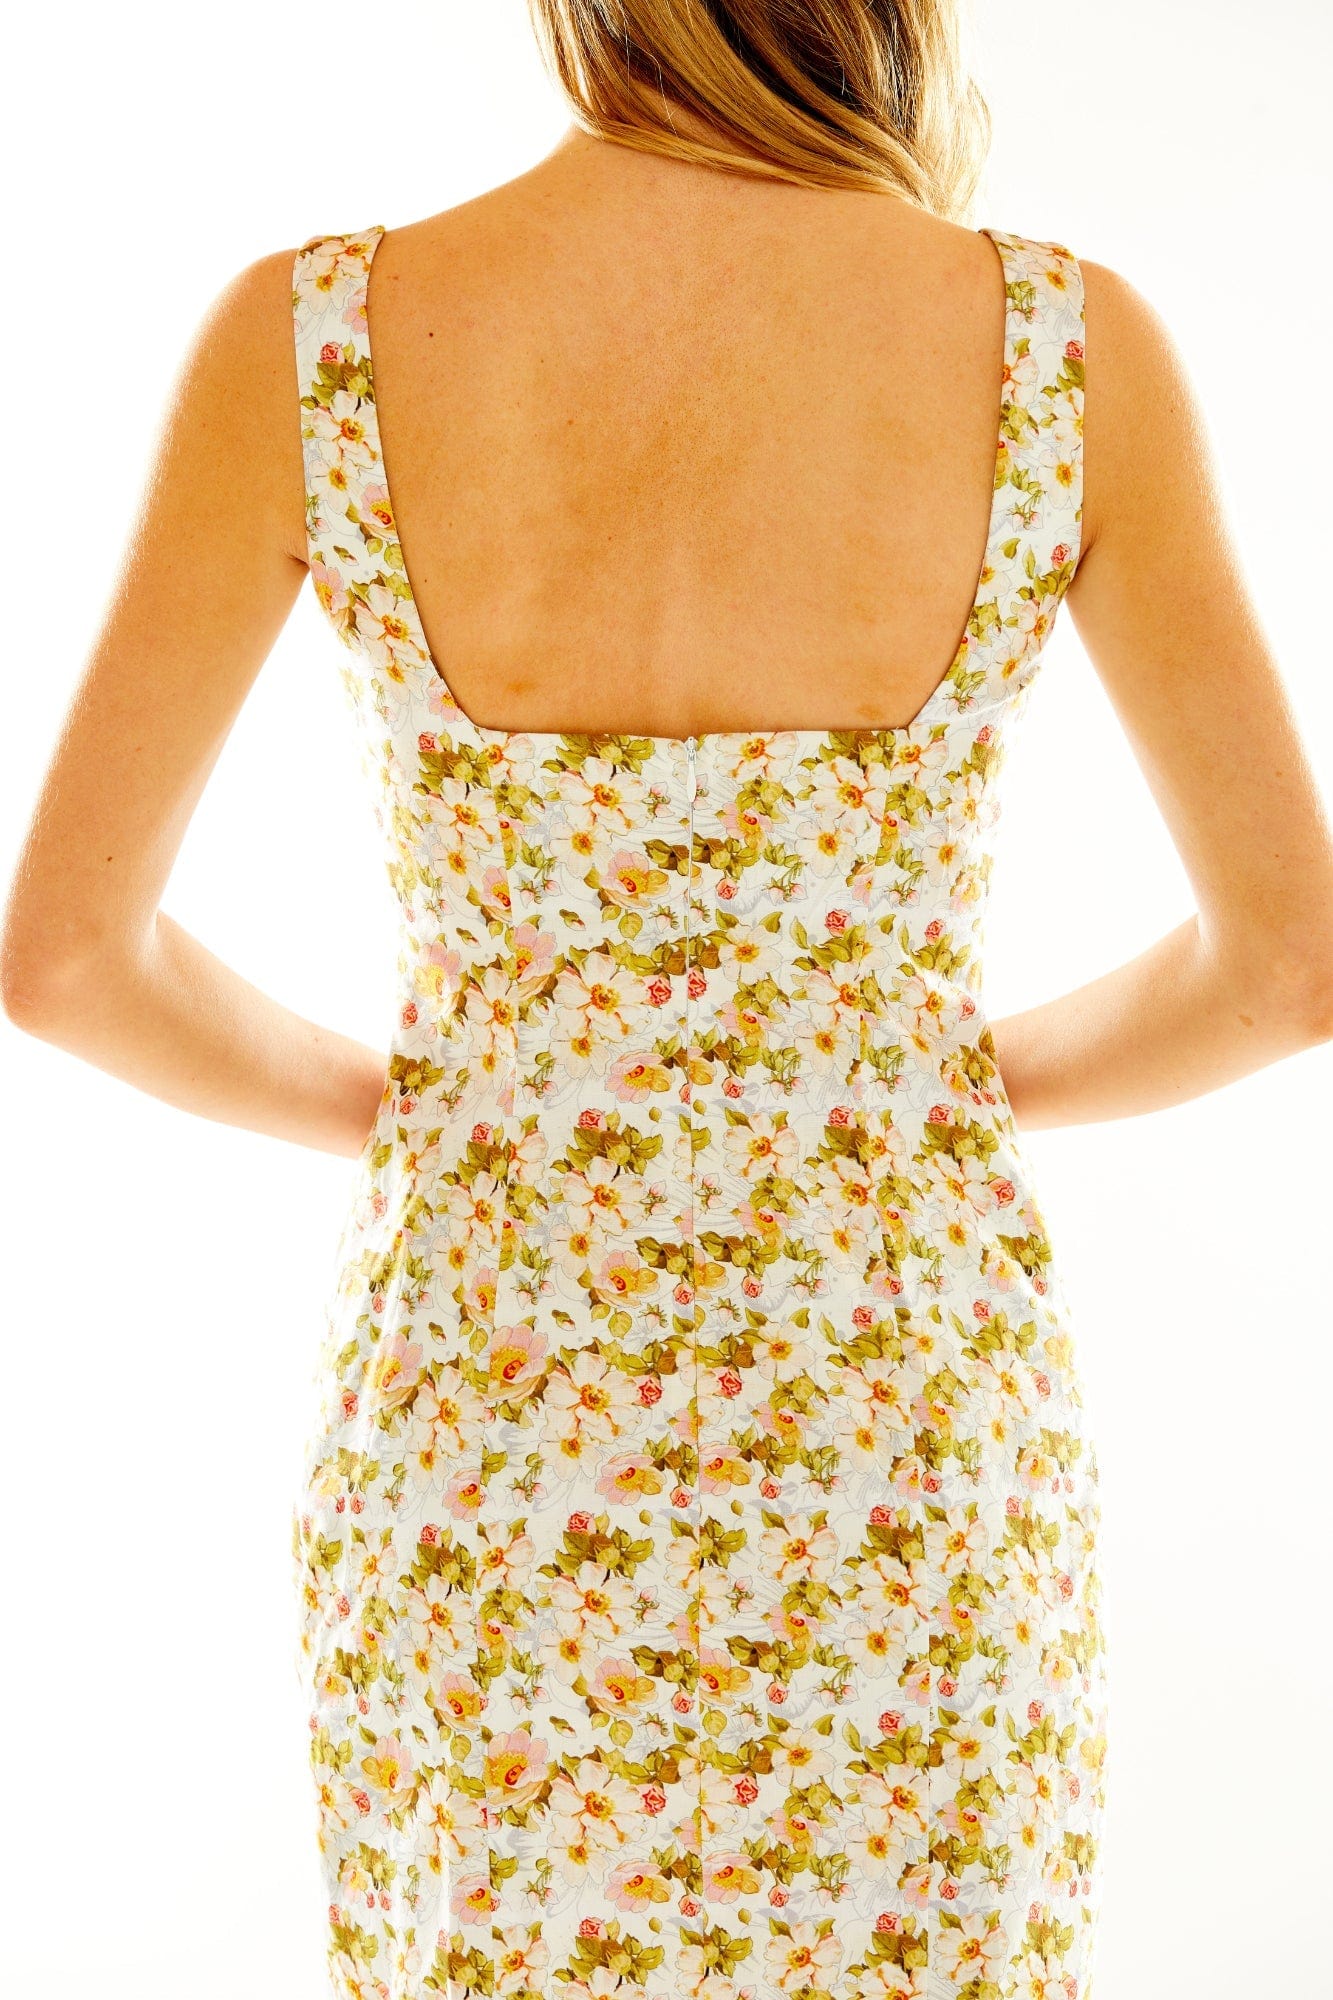 Willard Road Dress The Betsey Dress in Spring Floral